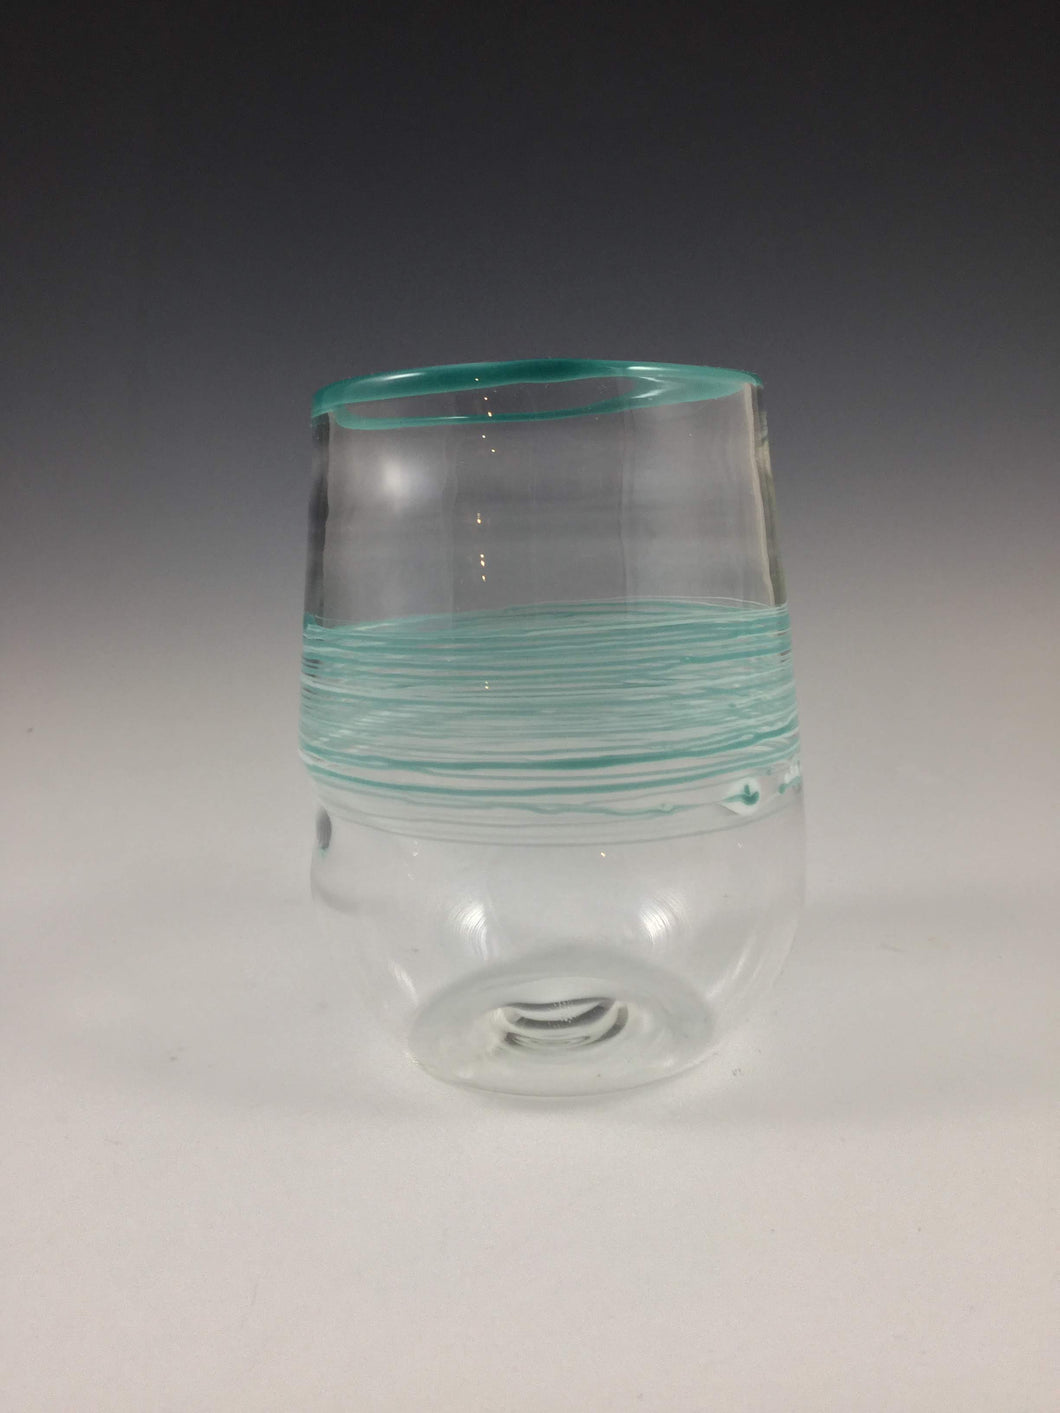 LaBrecque glass, Handmade Clear Glass with Teal Bands